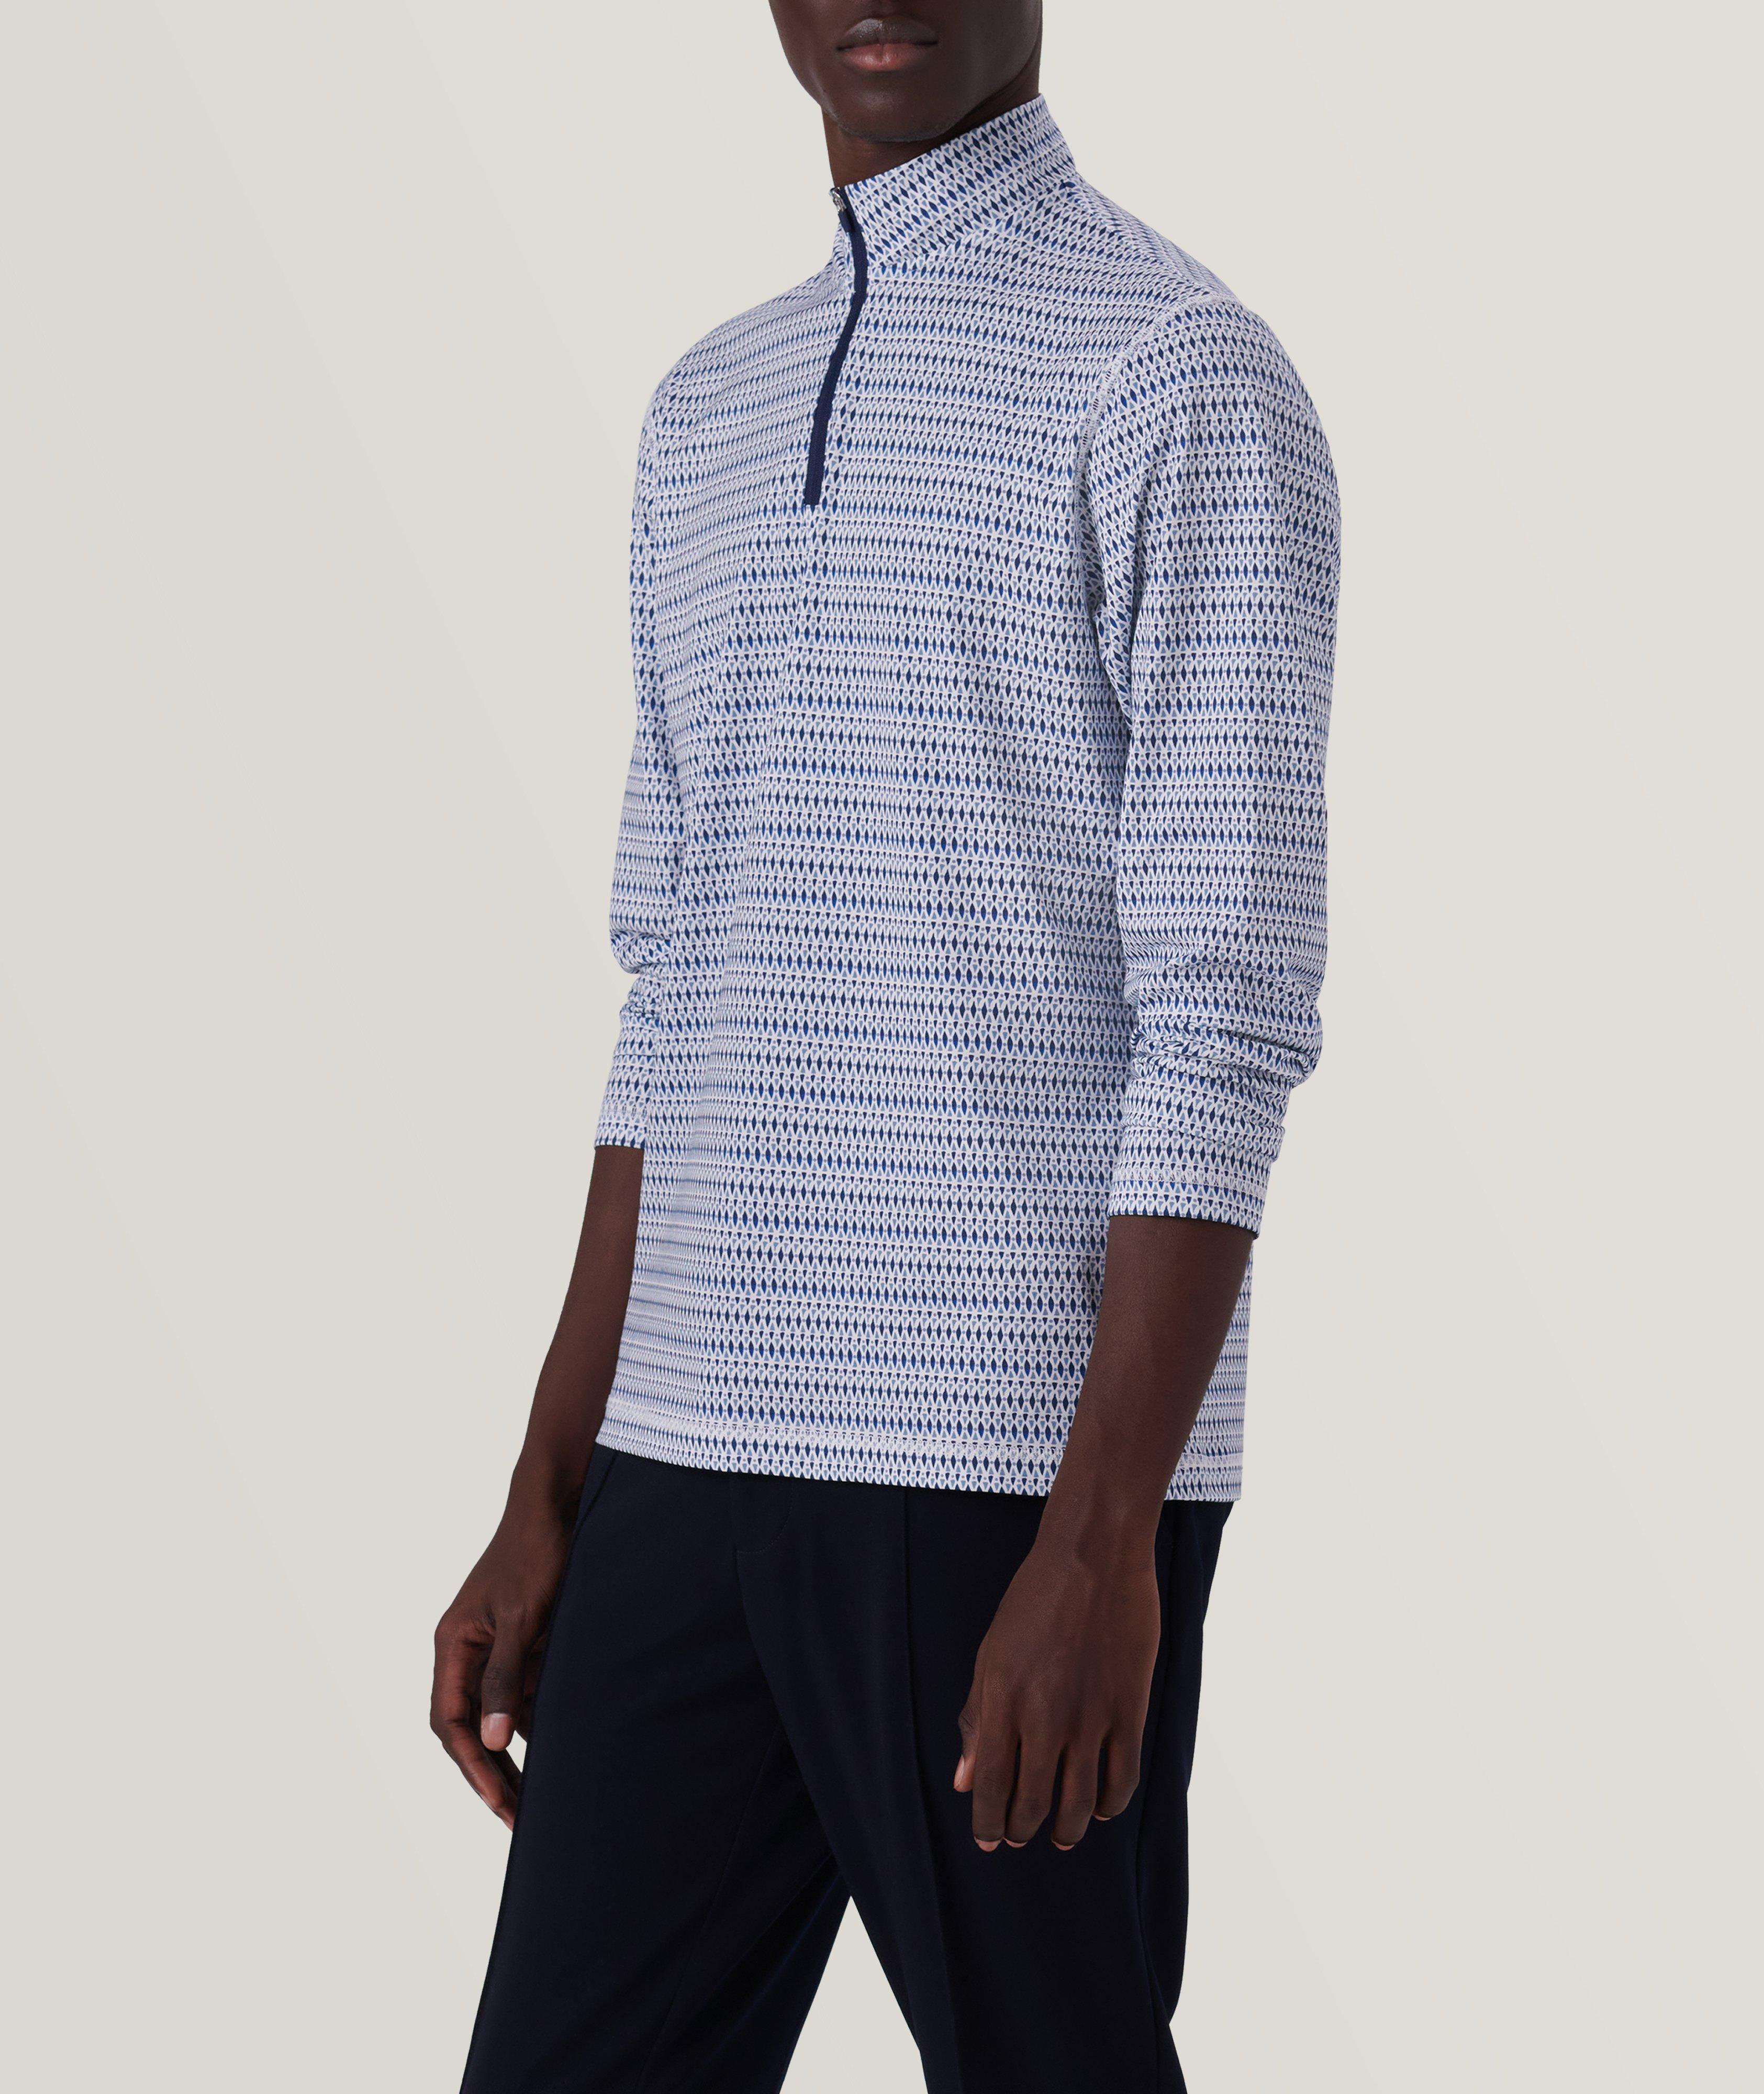 Anthony Stretch-OoohCotton Quarter Zip Pullover image 3